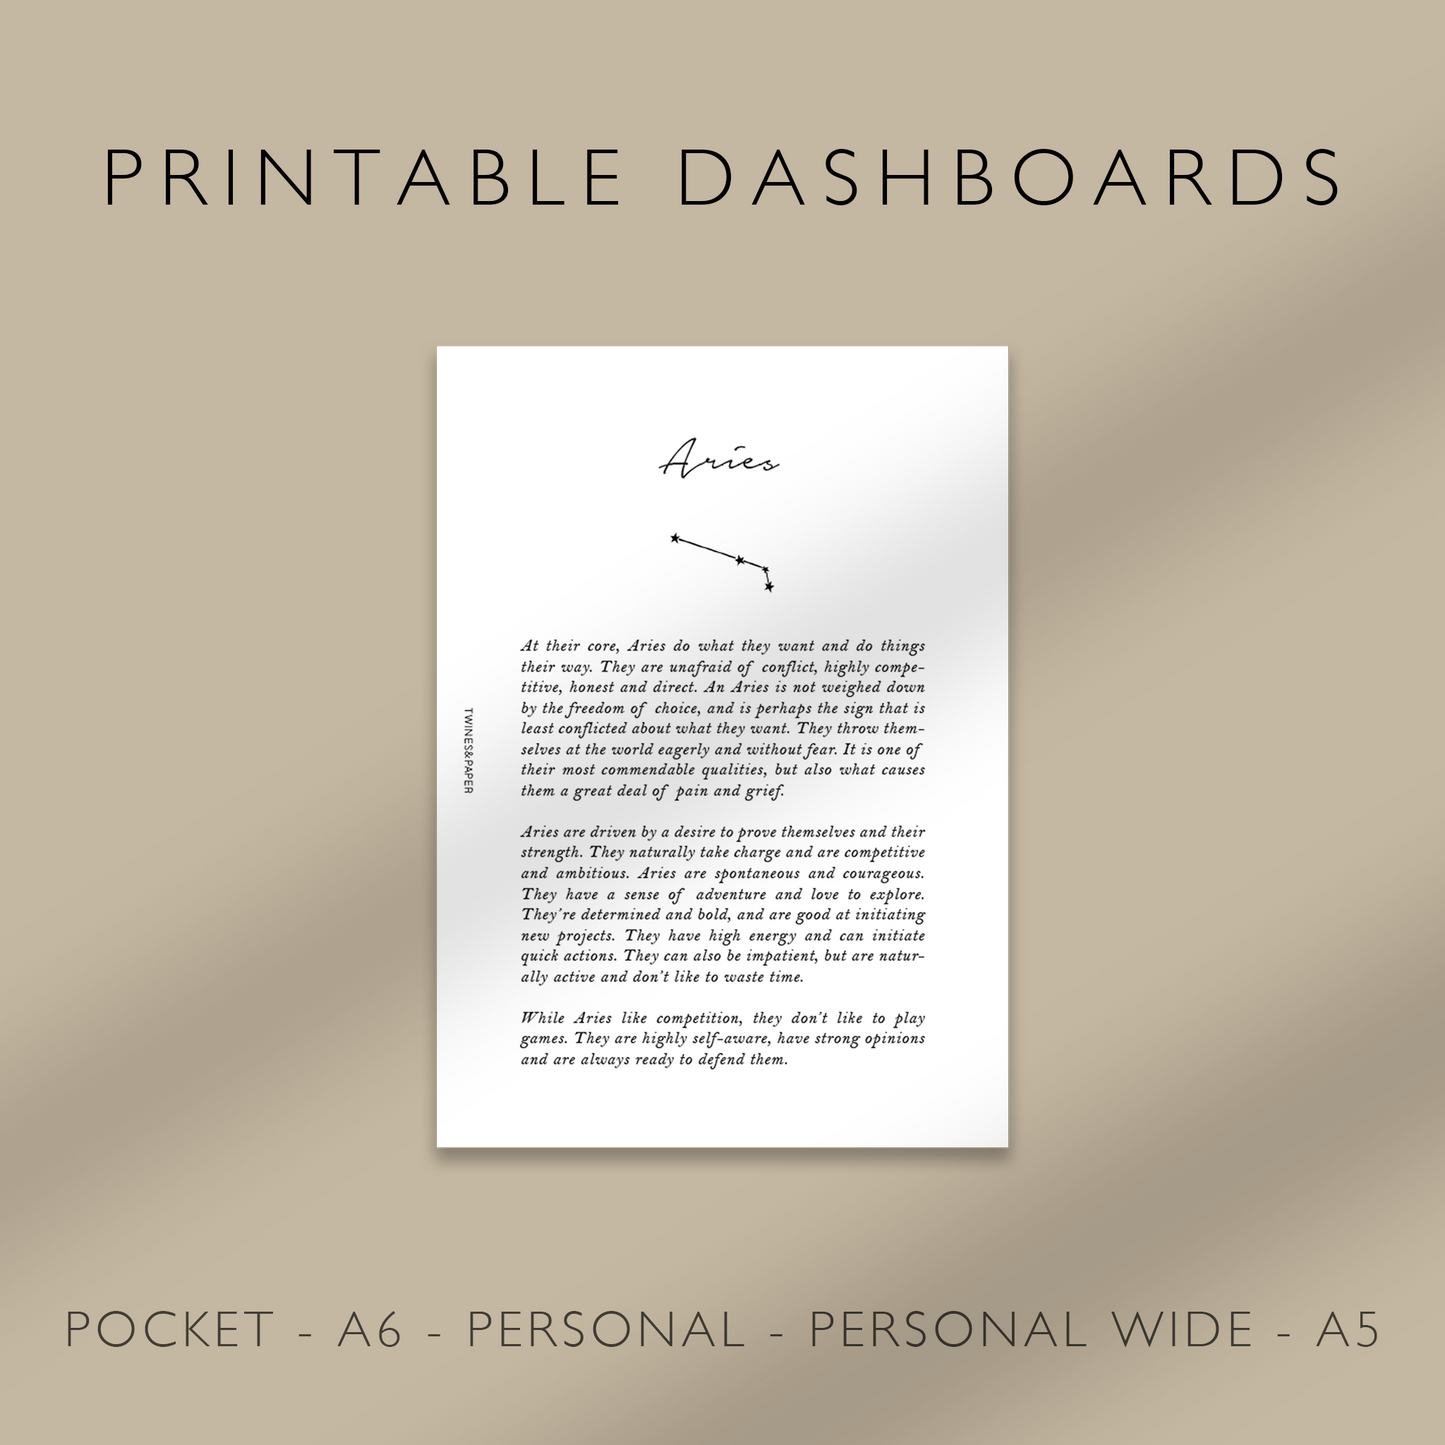 "Aries" Zodiac Sign Personality - Printable Dashboards